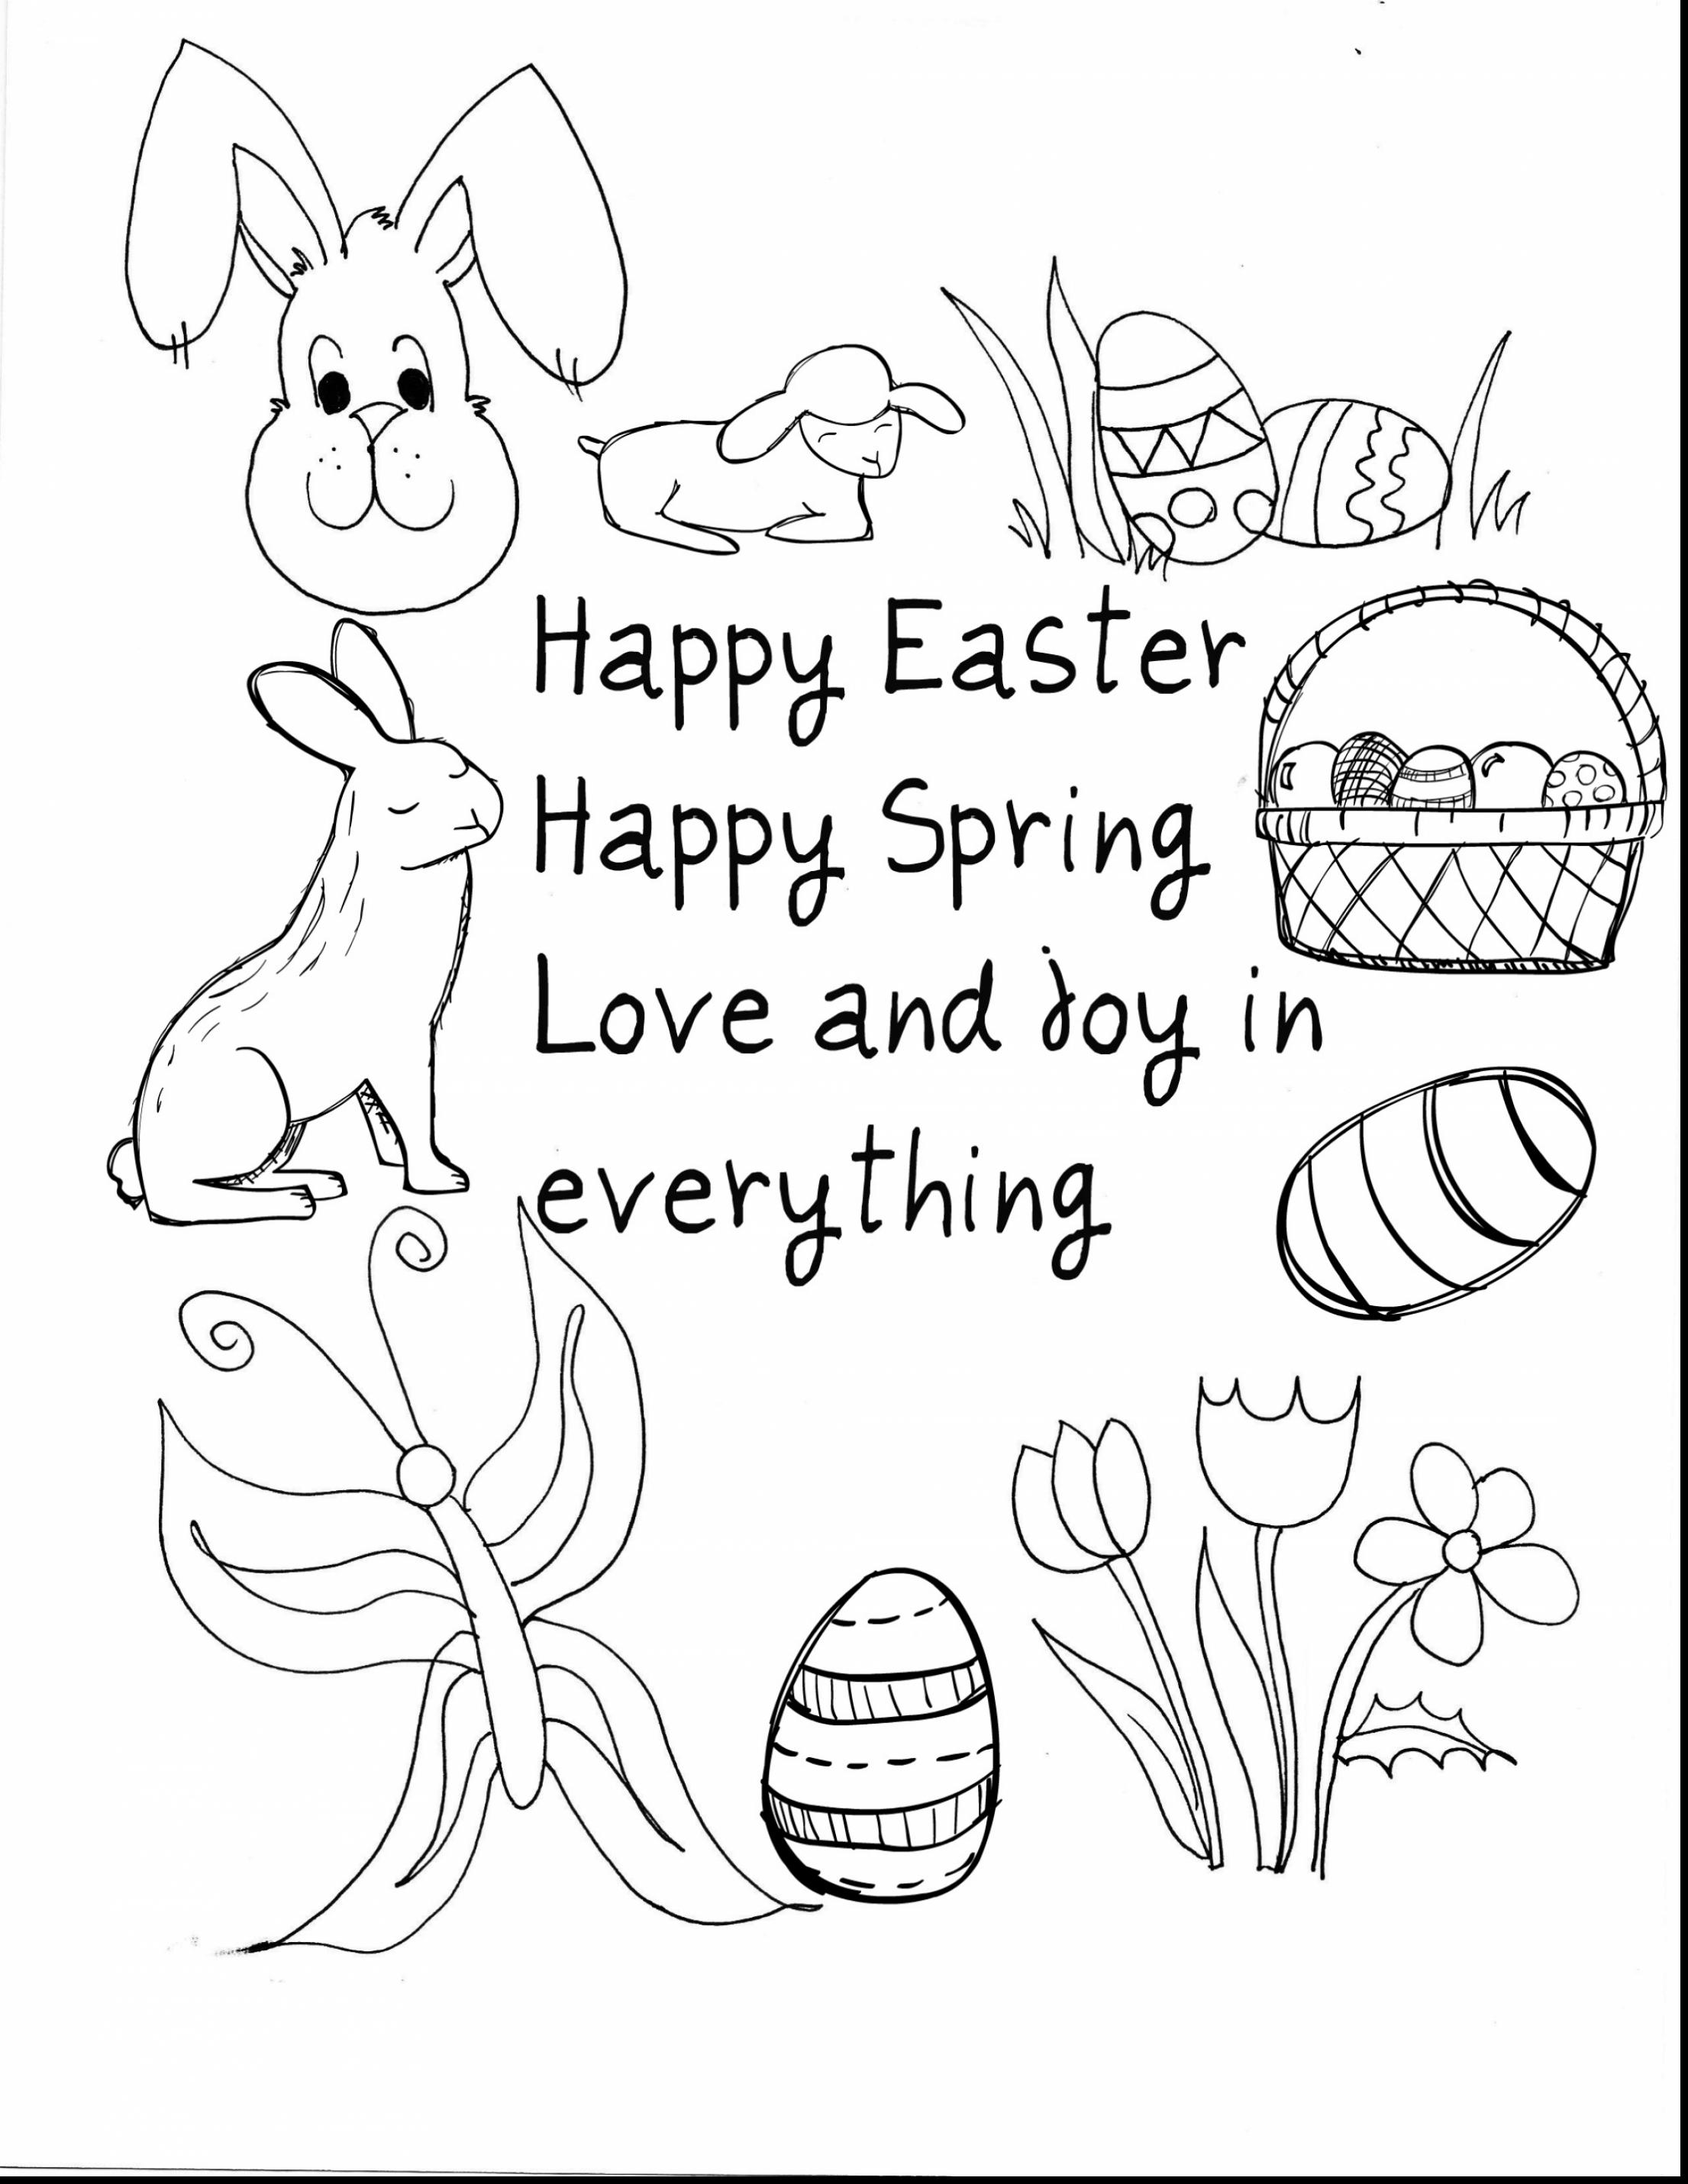 Free Printable Religious Easter Coloring Pages at GetDrawings | Free